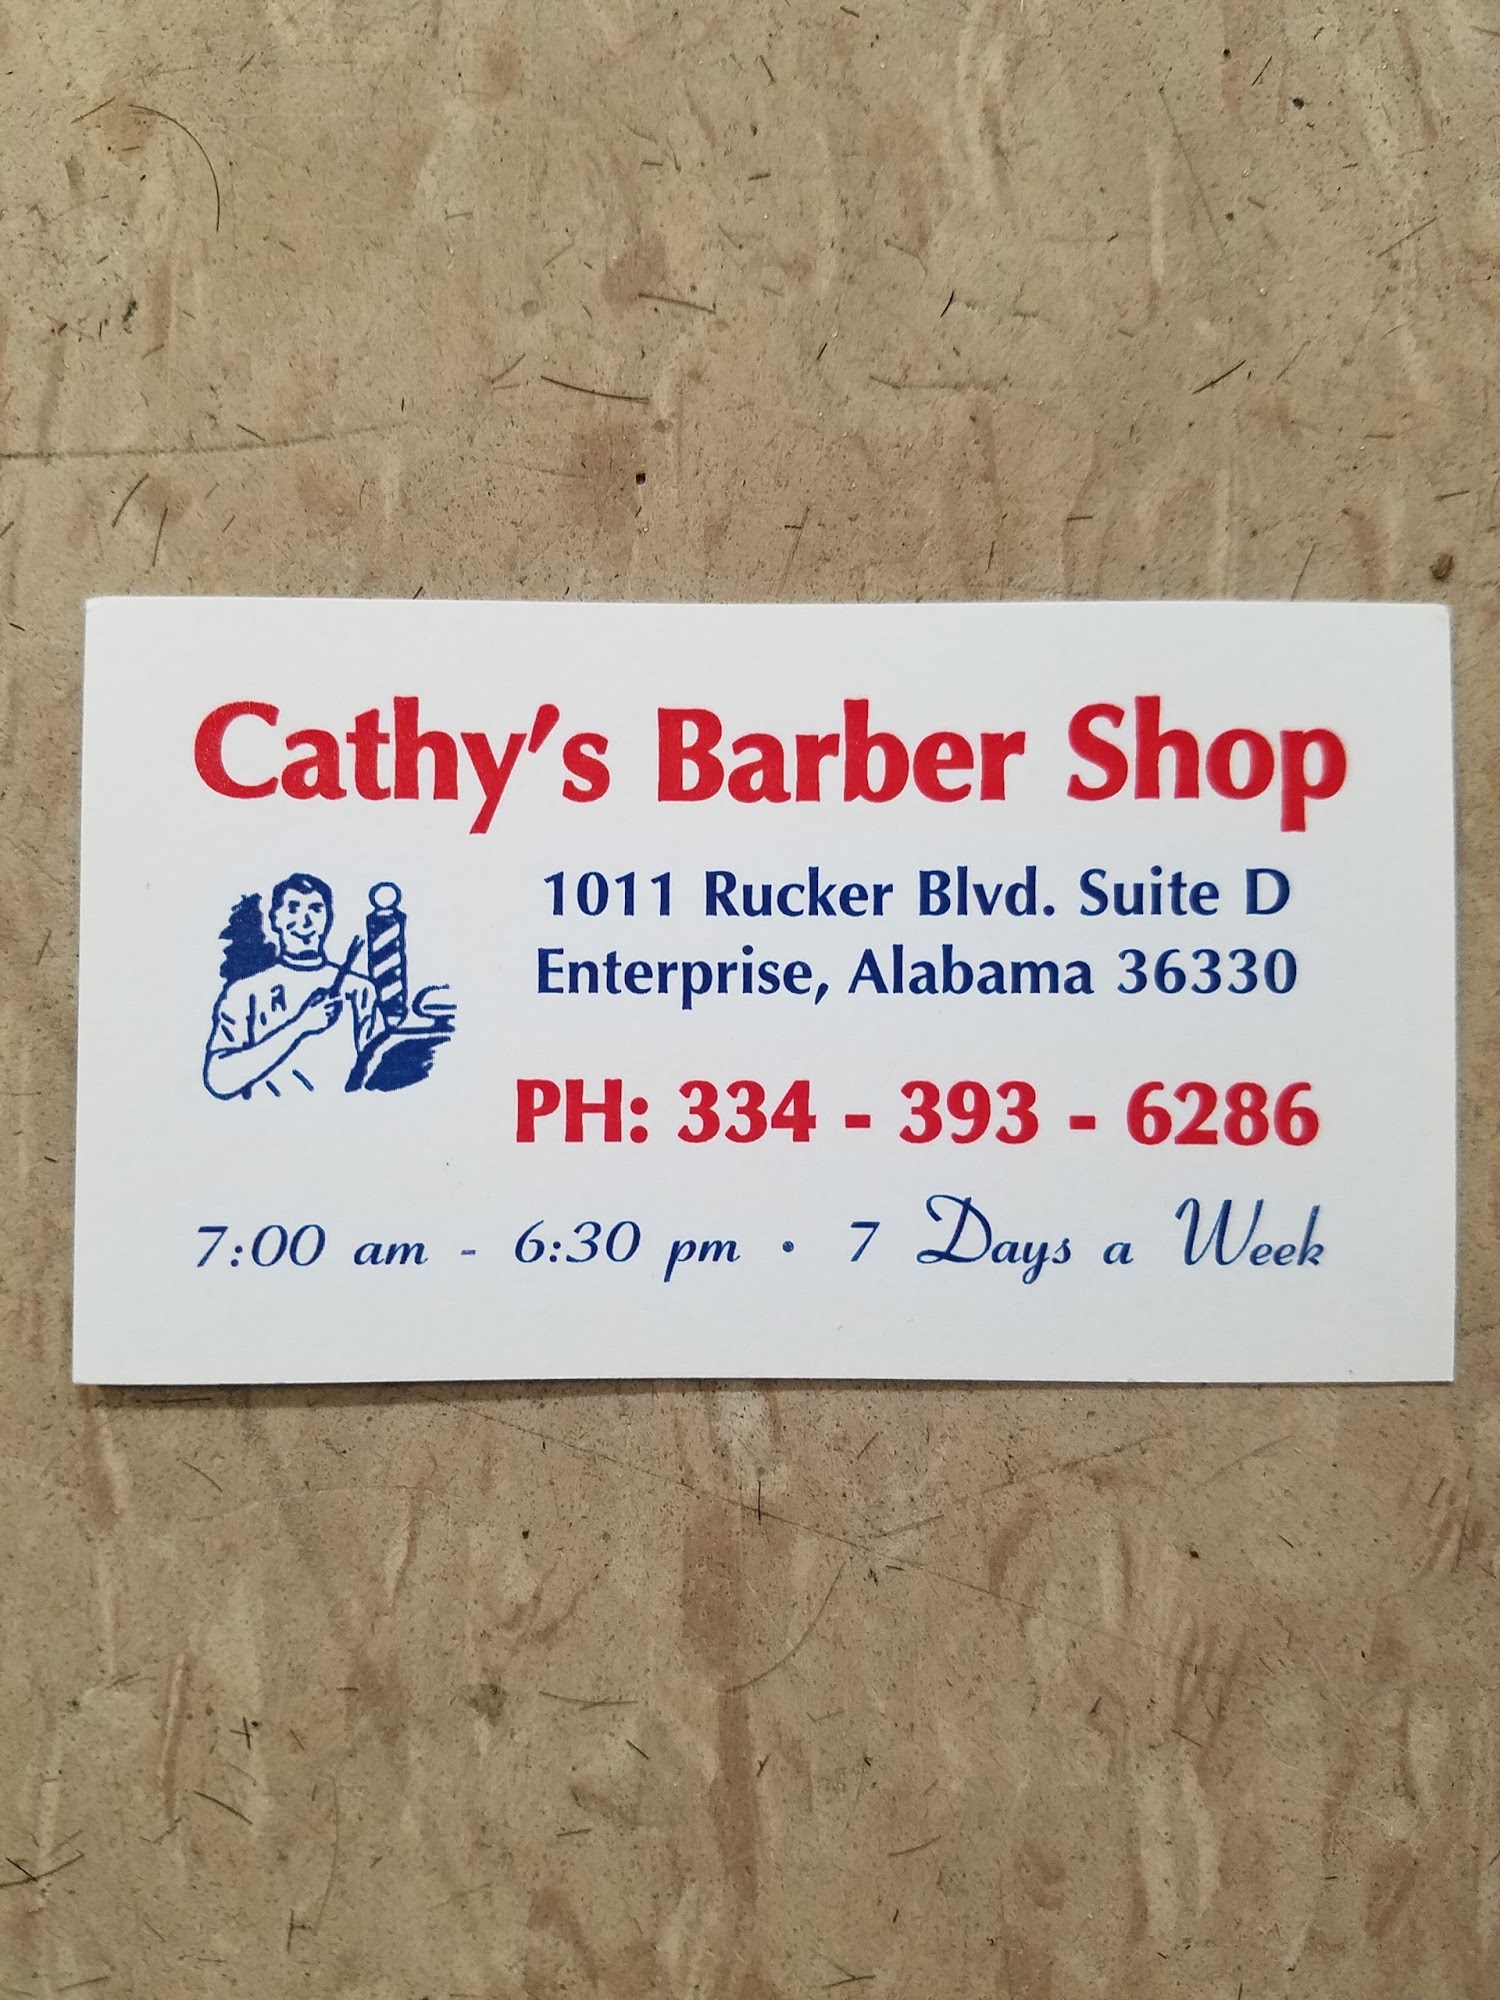 Cathy's Barber Shop